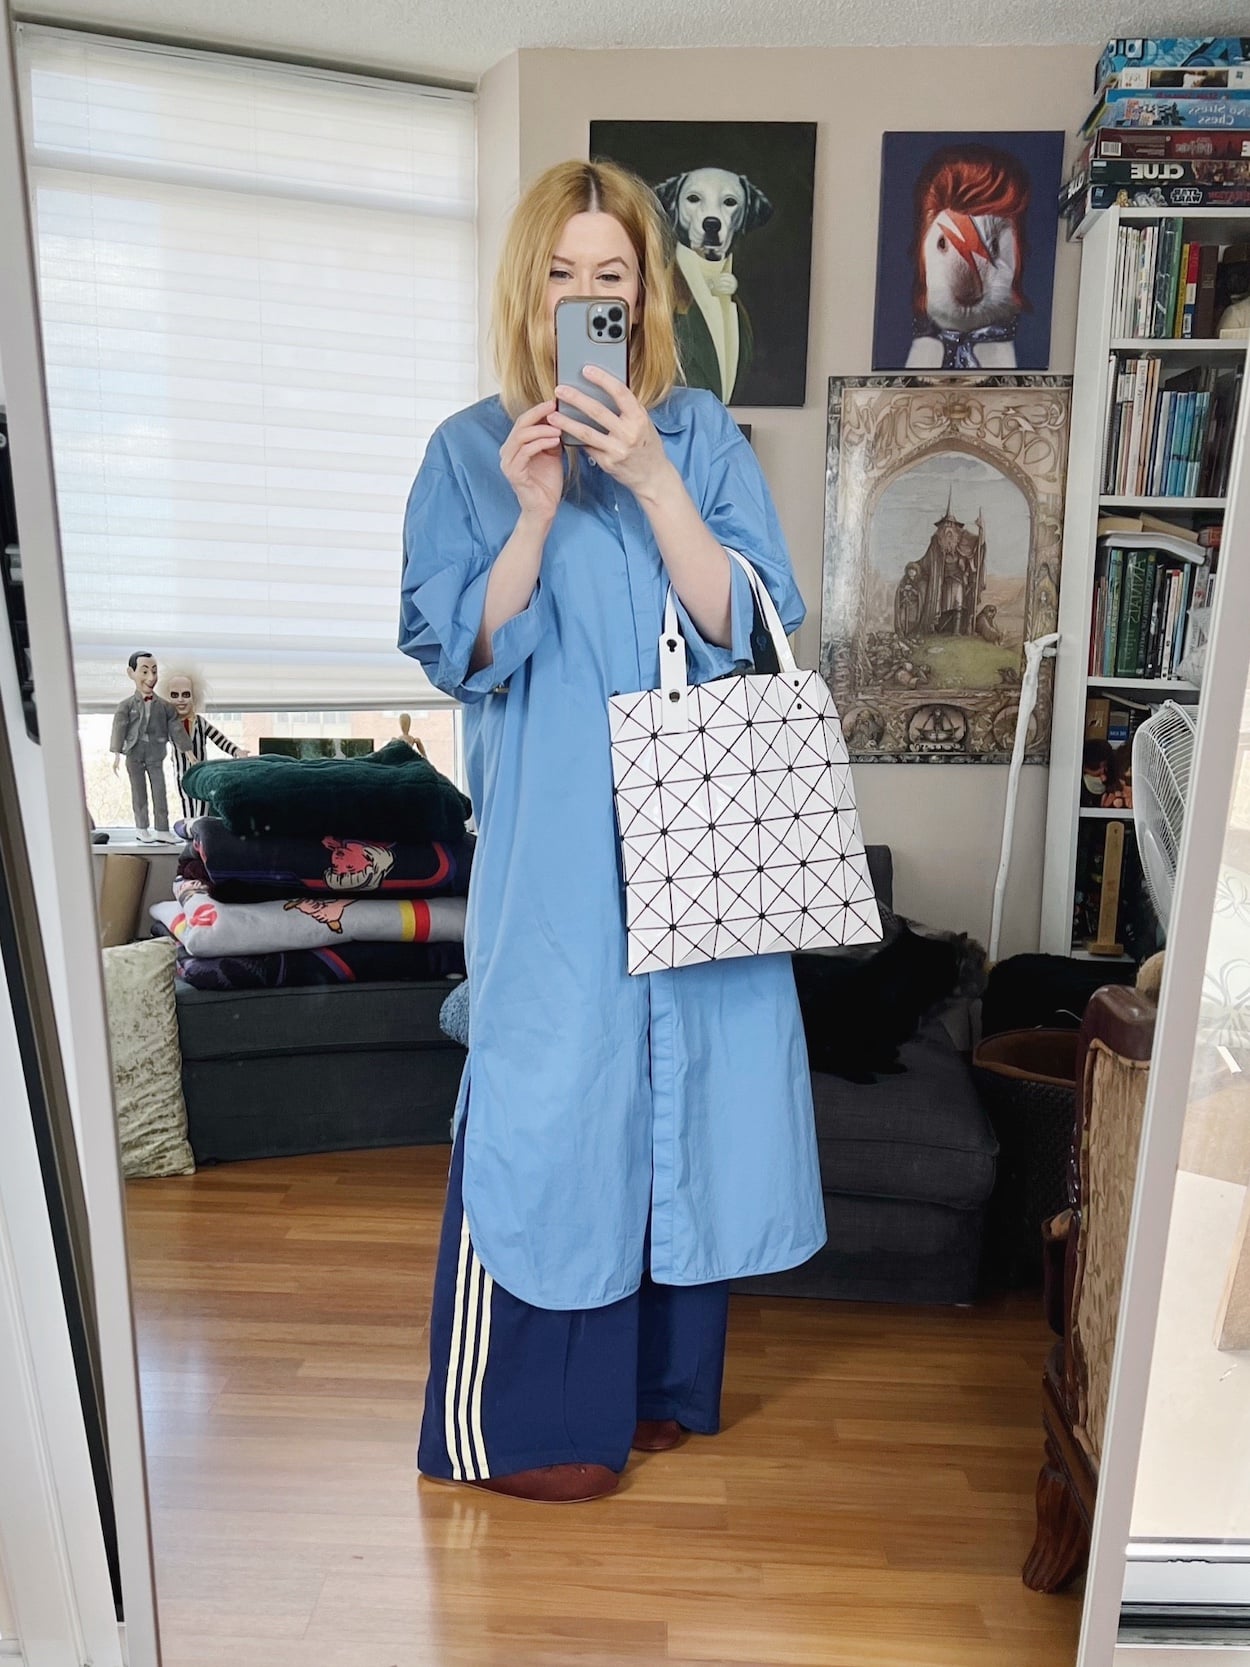 Sara of livelovesara is standing in front of a mirror taking a photo of her outfit. She is wearing a long, blue button up shirt dress over blue adidas track pants, brown ballet flats, and is carrying a white Issey Miyake bag.